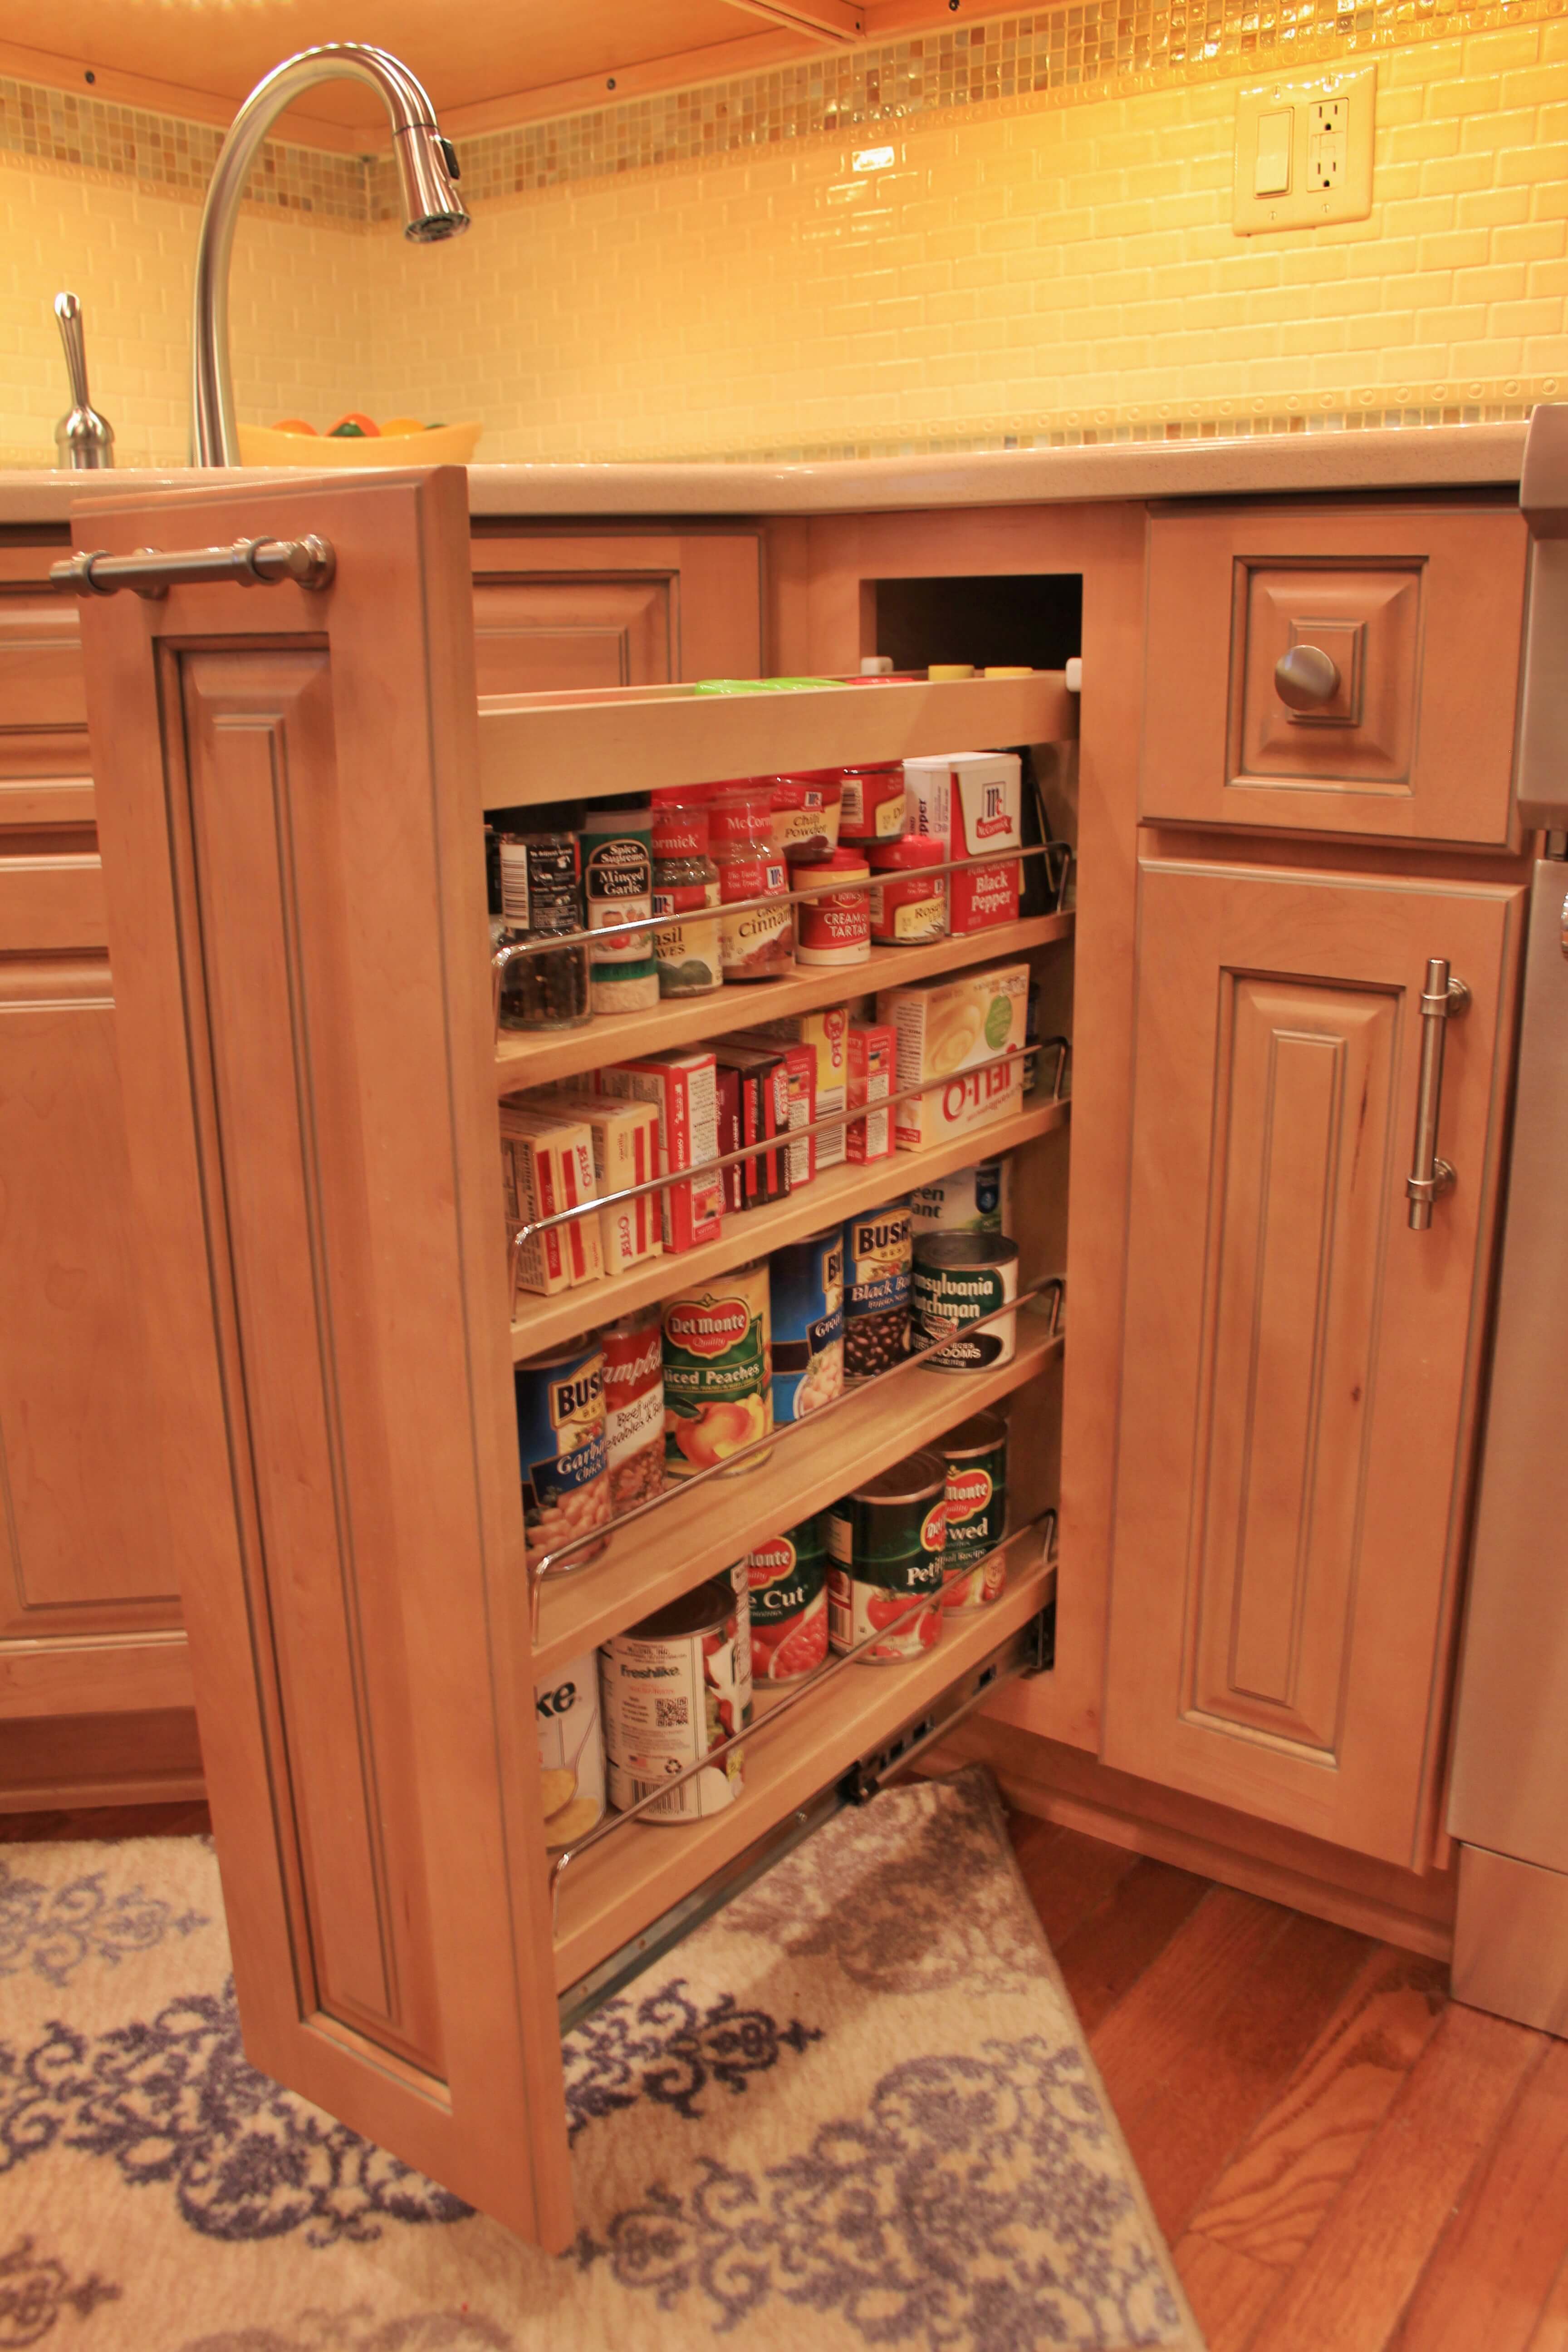 Make sure your new kitchen includes a lot of extra storage.